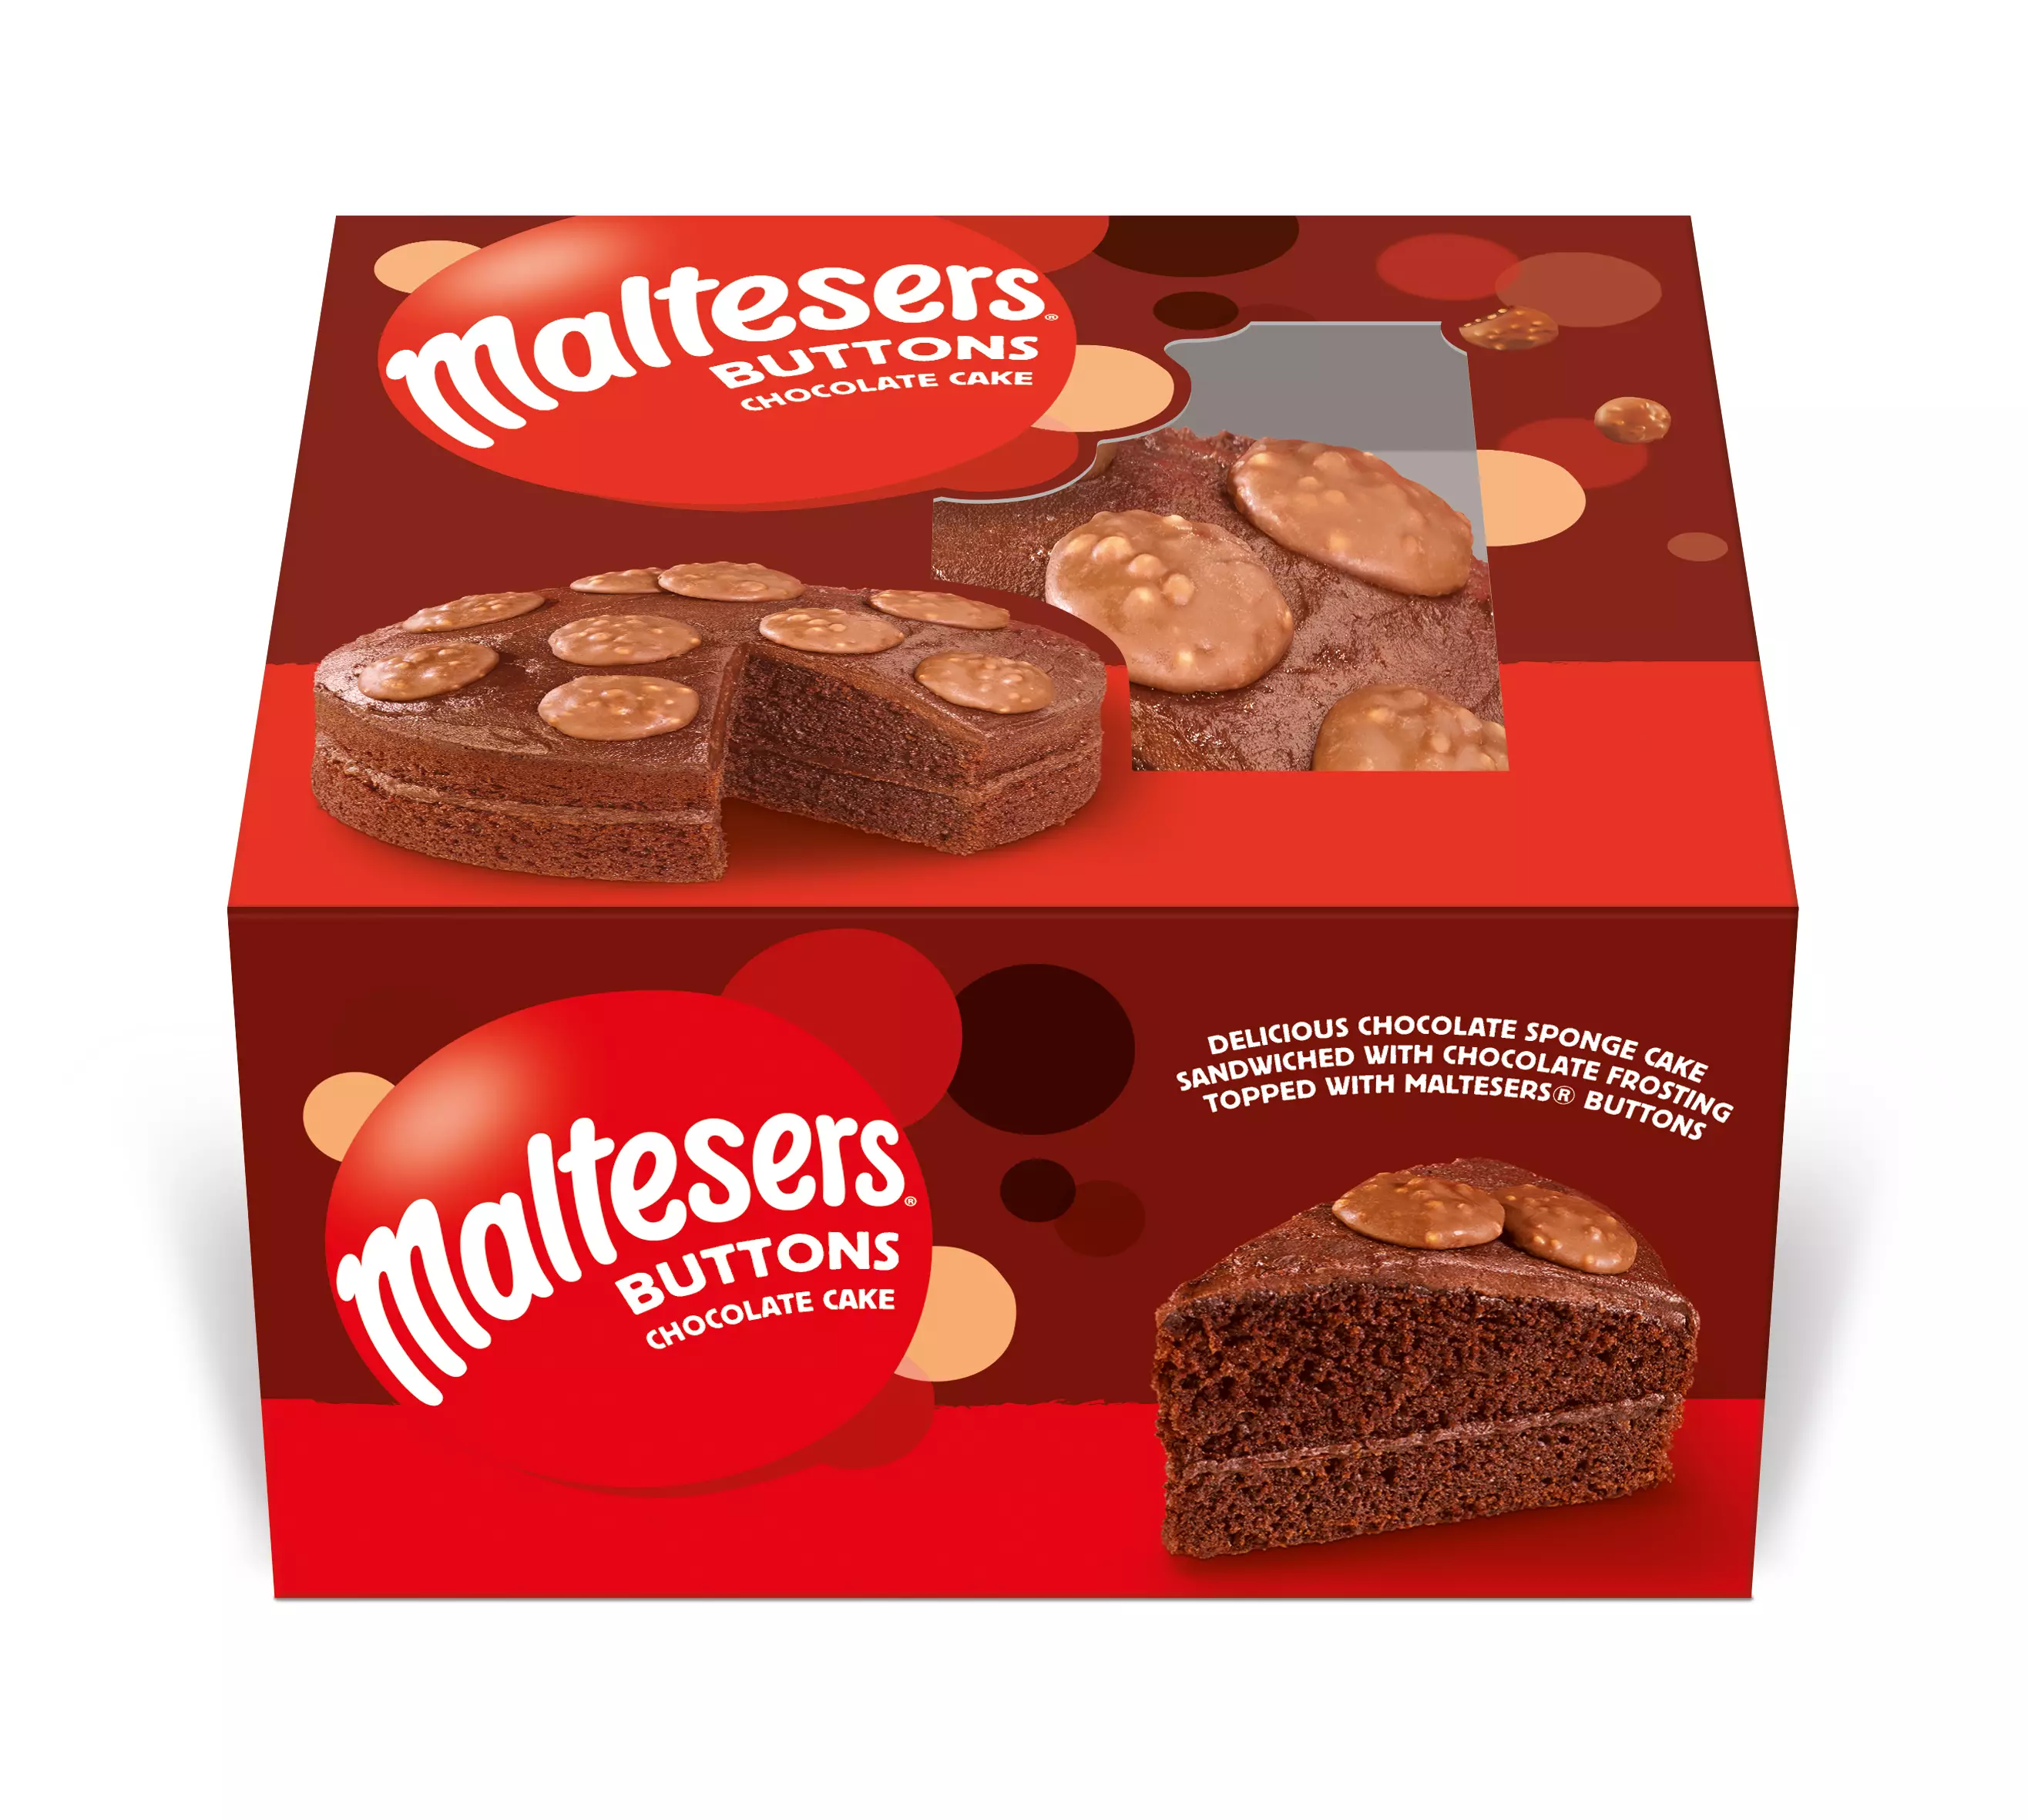 The Malteser Button cake is stuffed full of chocolate (